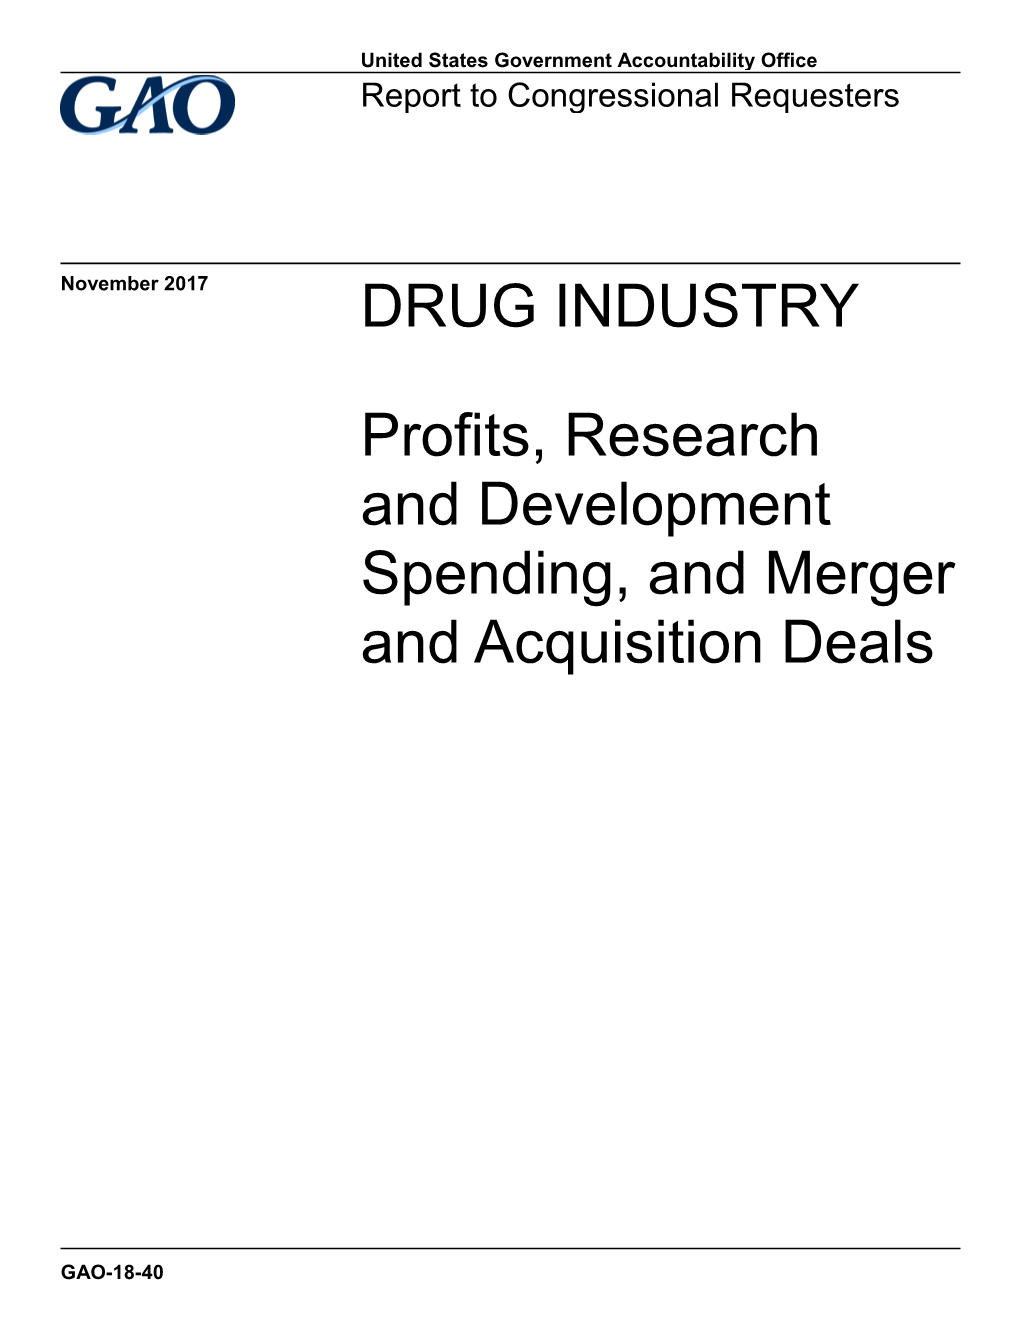 DRUG INDUSTRY: Profits, Research and Development Spending